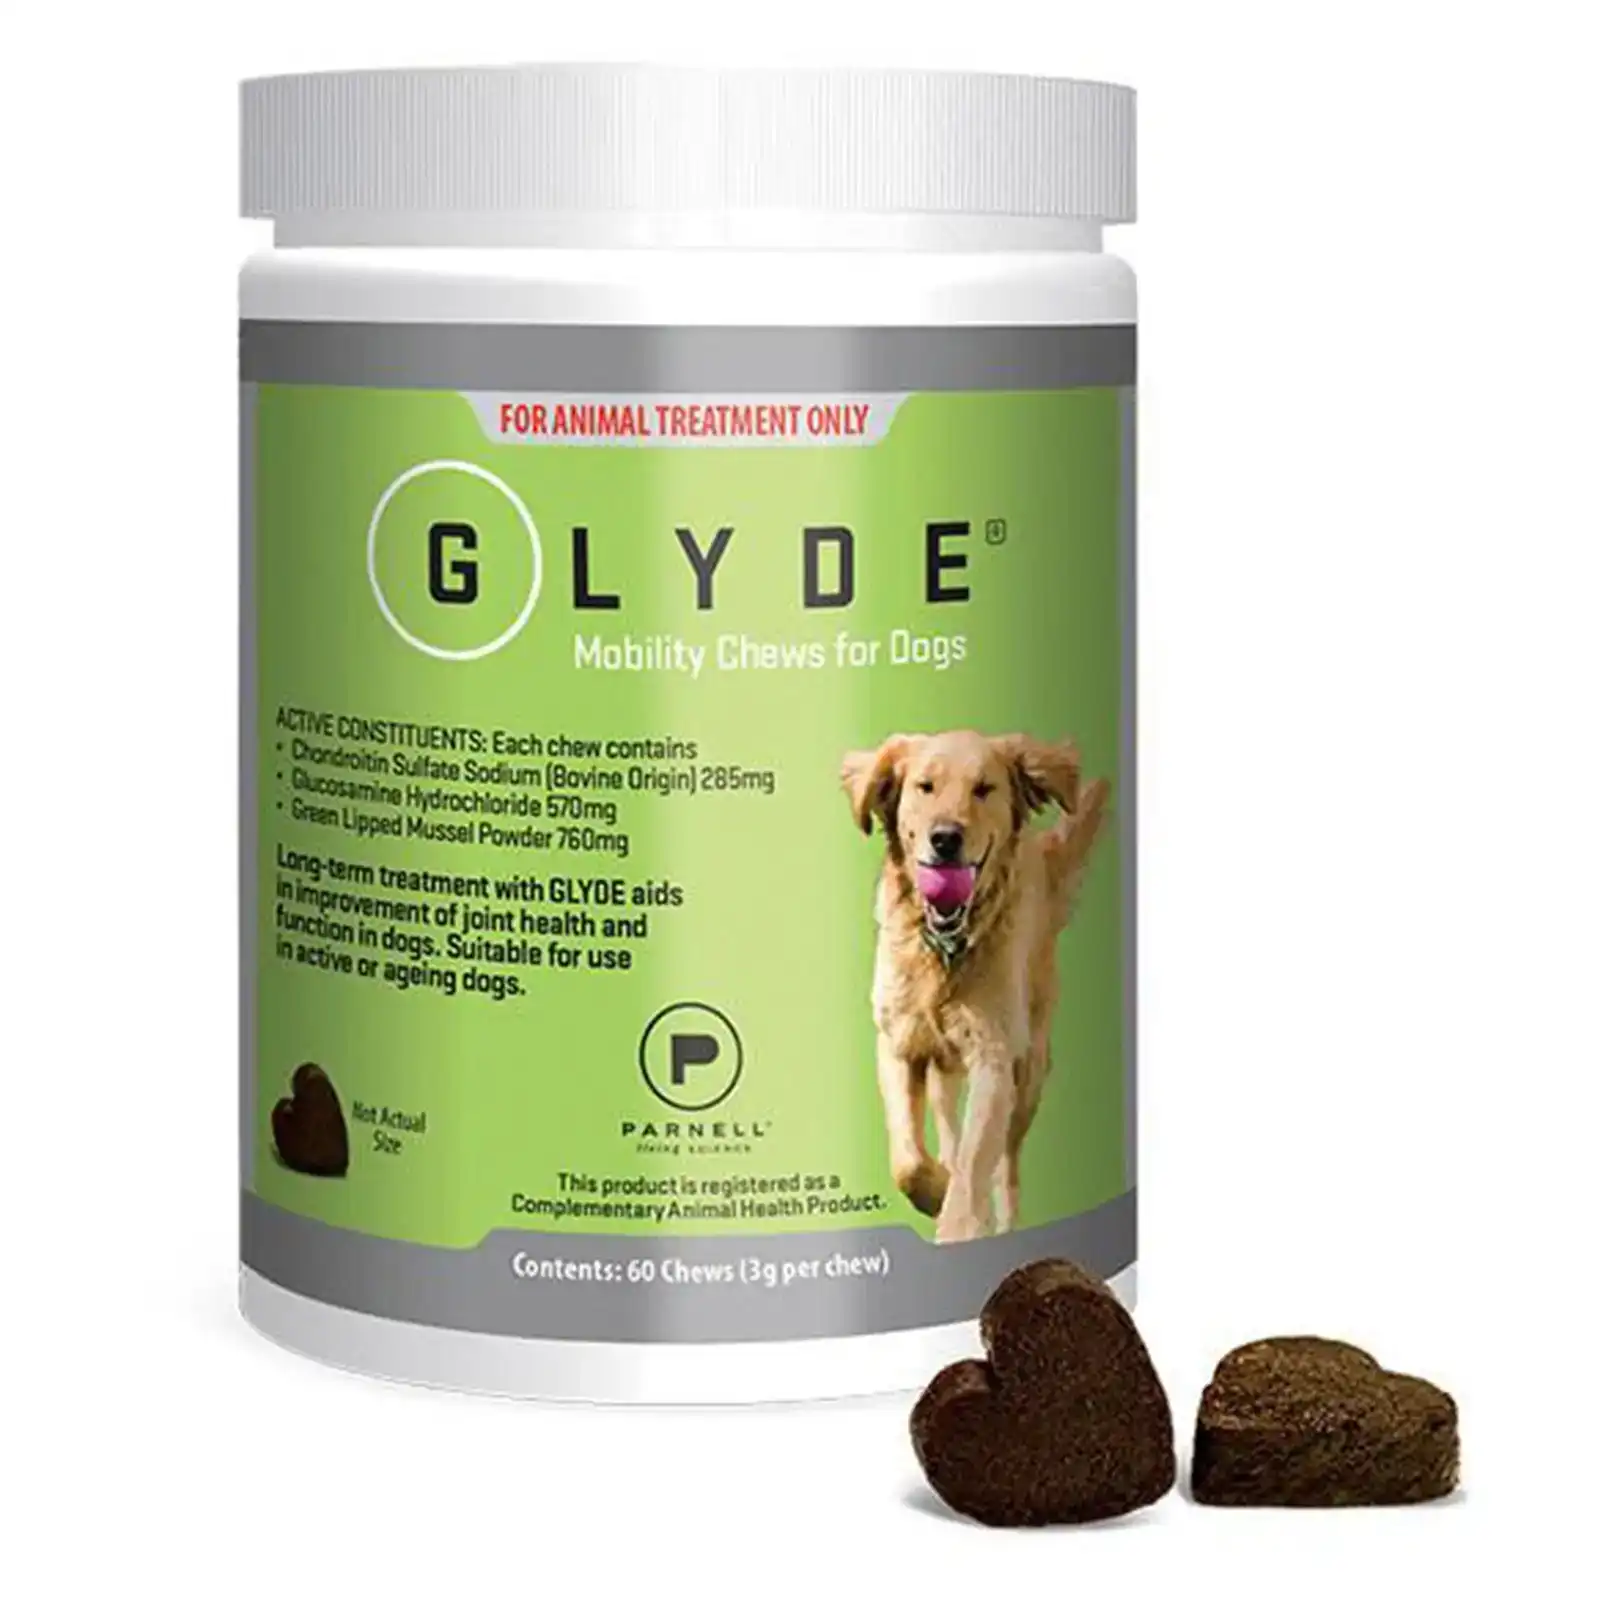 Glyde Mobility Chews For Dogs 60 Chews